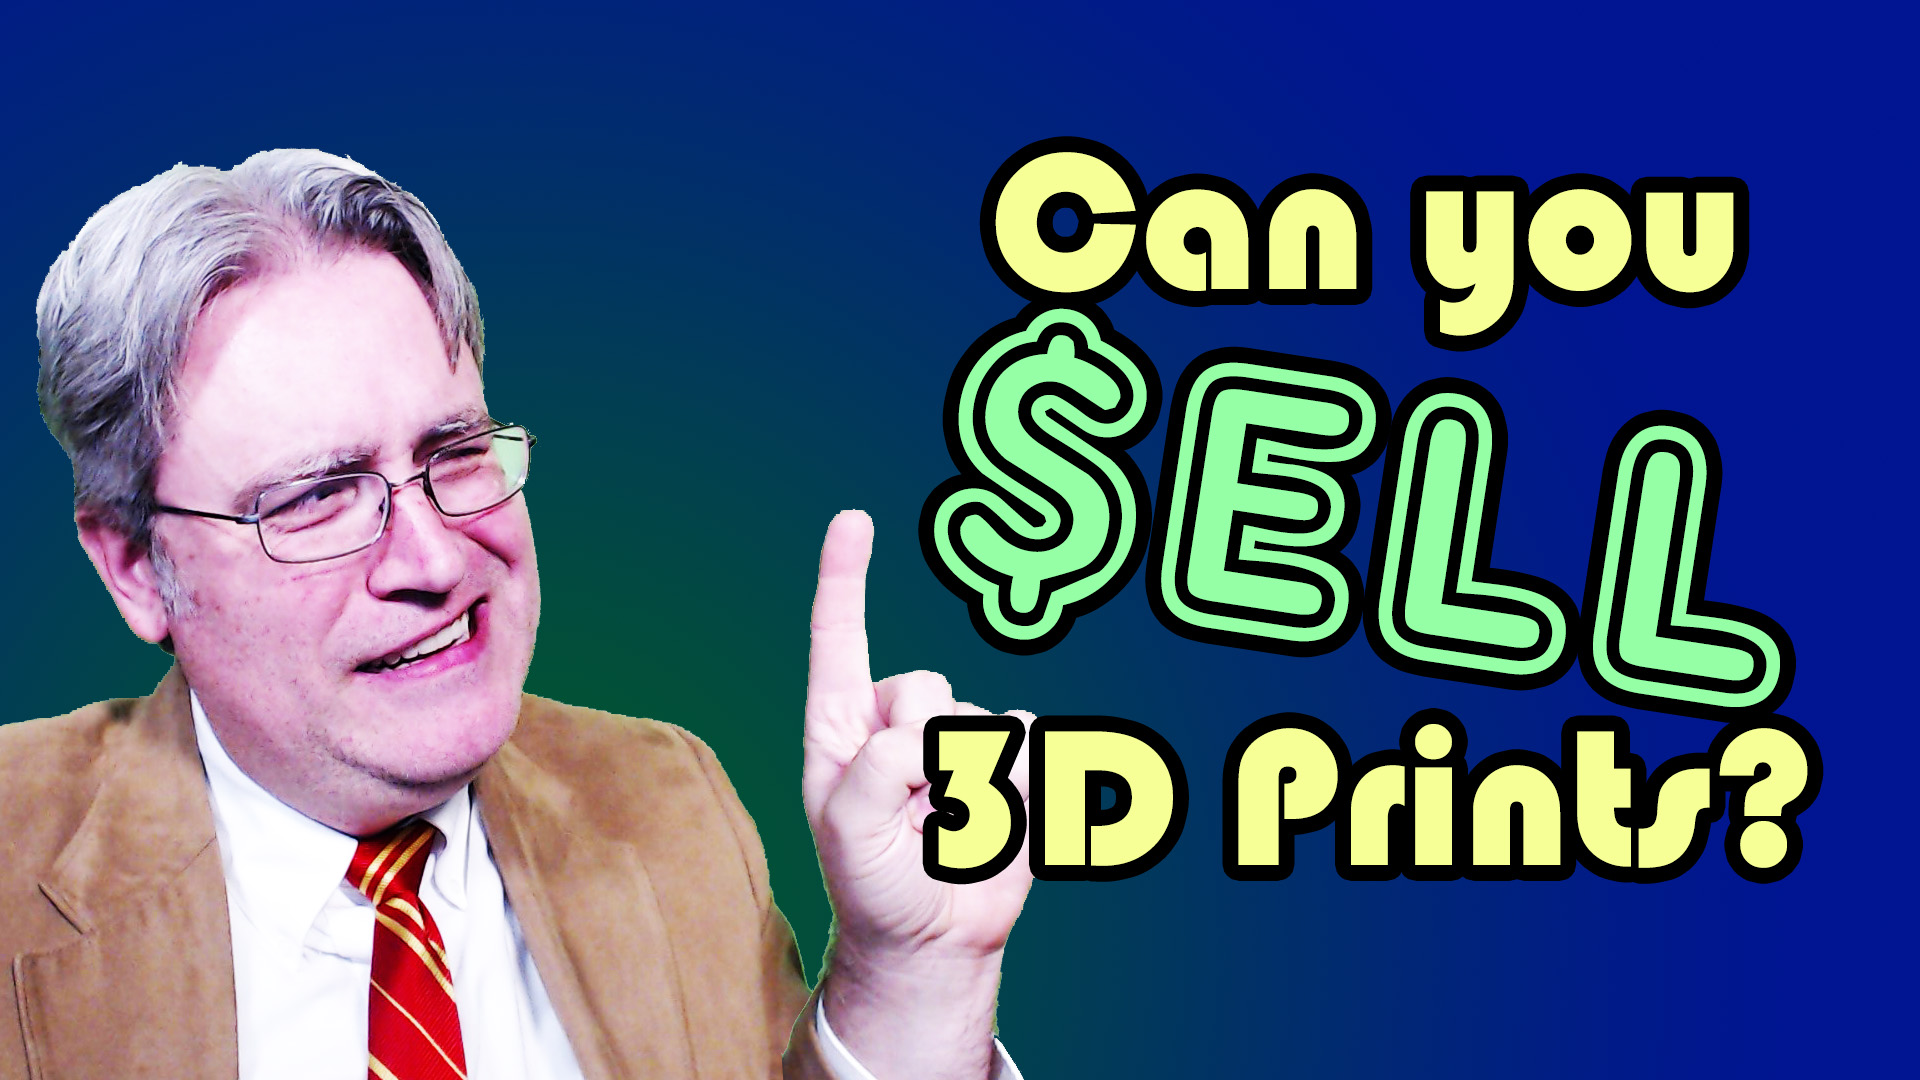 can-you-sell-3d-prints-video-3d-printing-professor